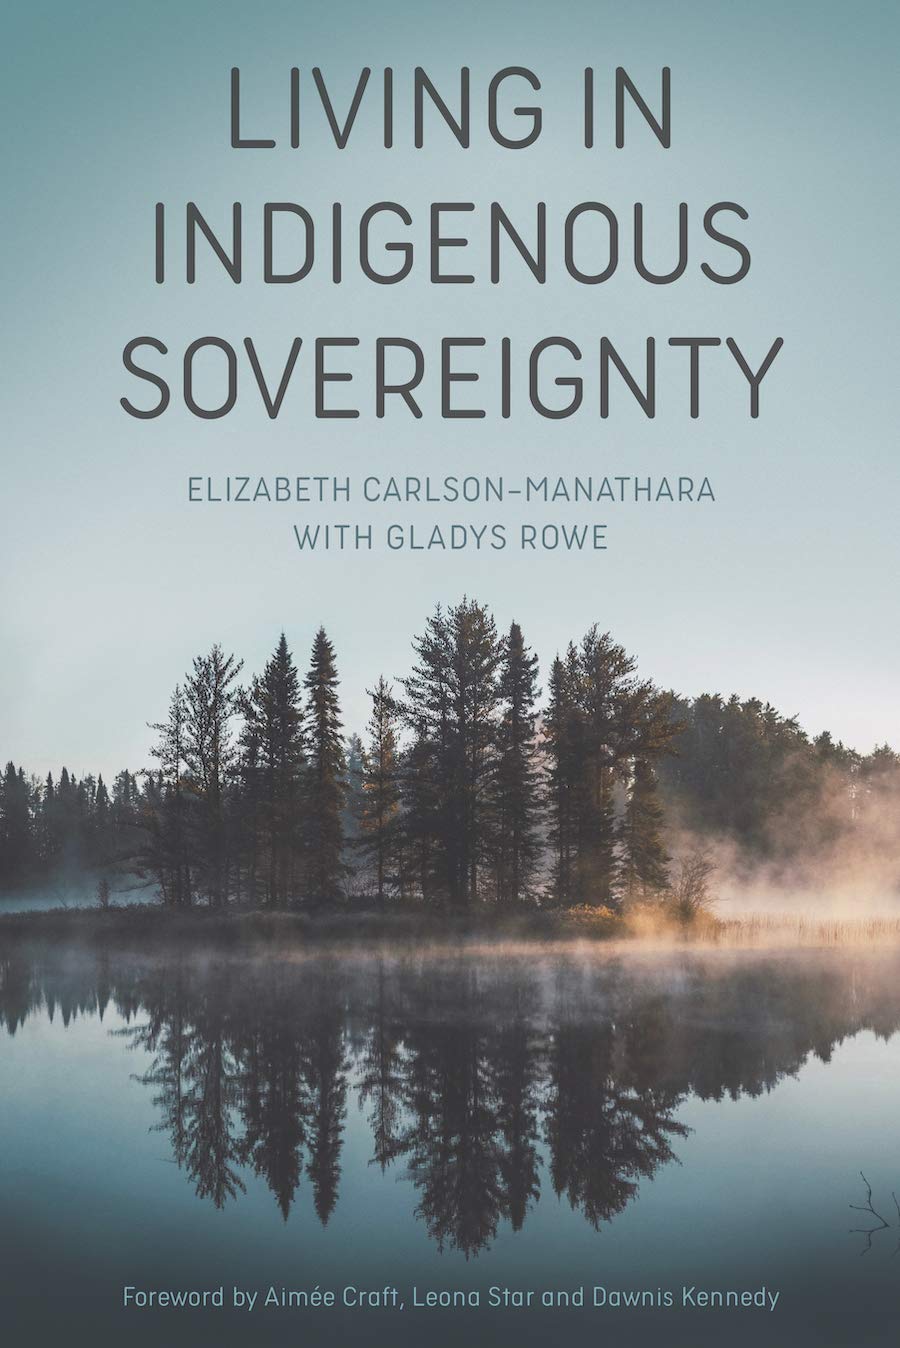 Living in Indigenous Sovereignty by Elizabeth Carlson-Manathara